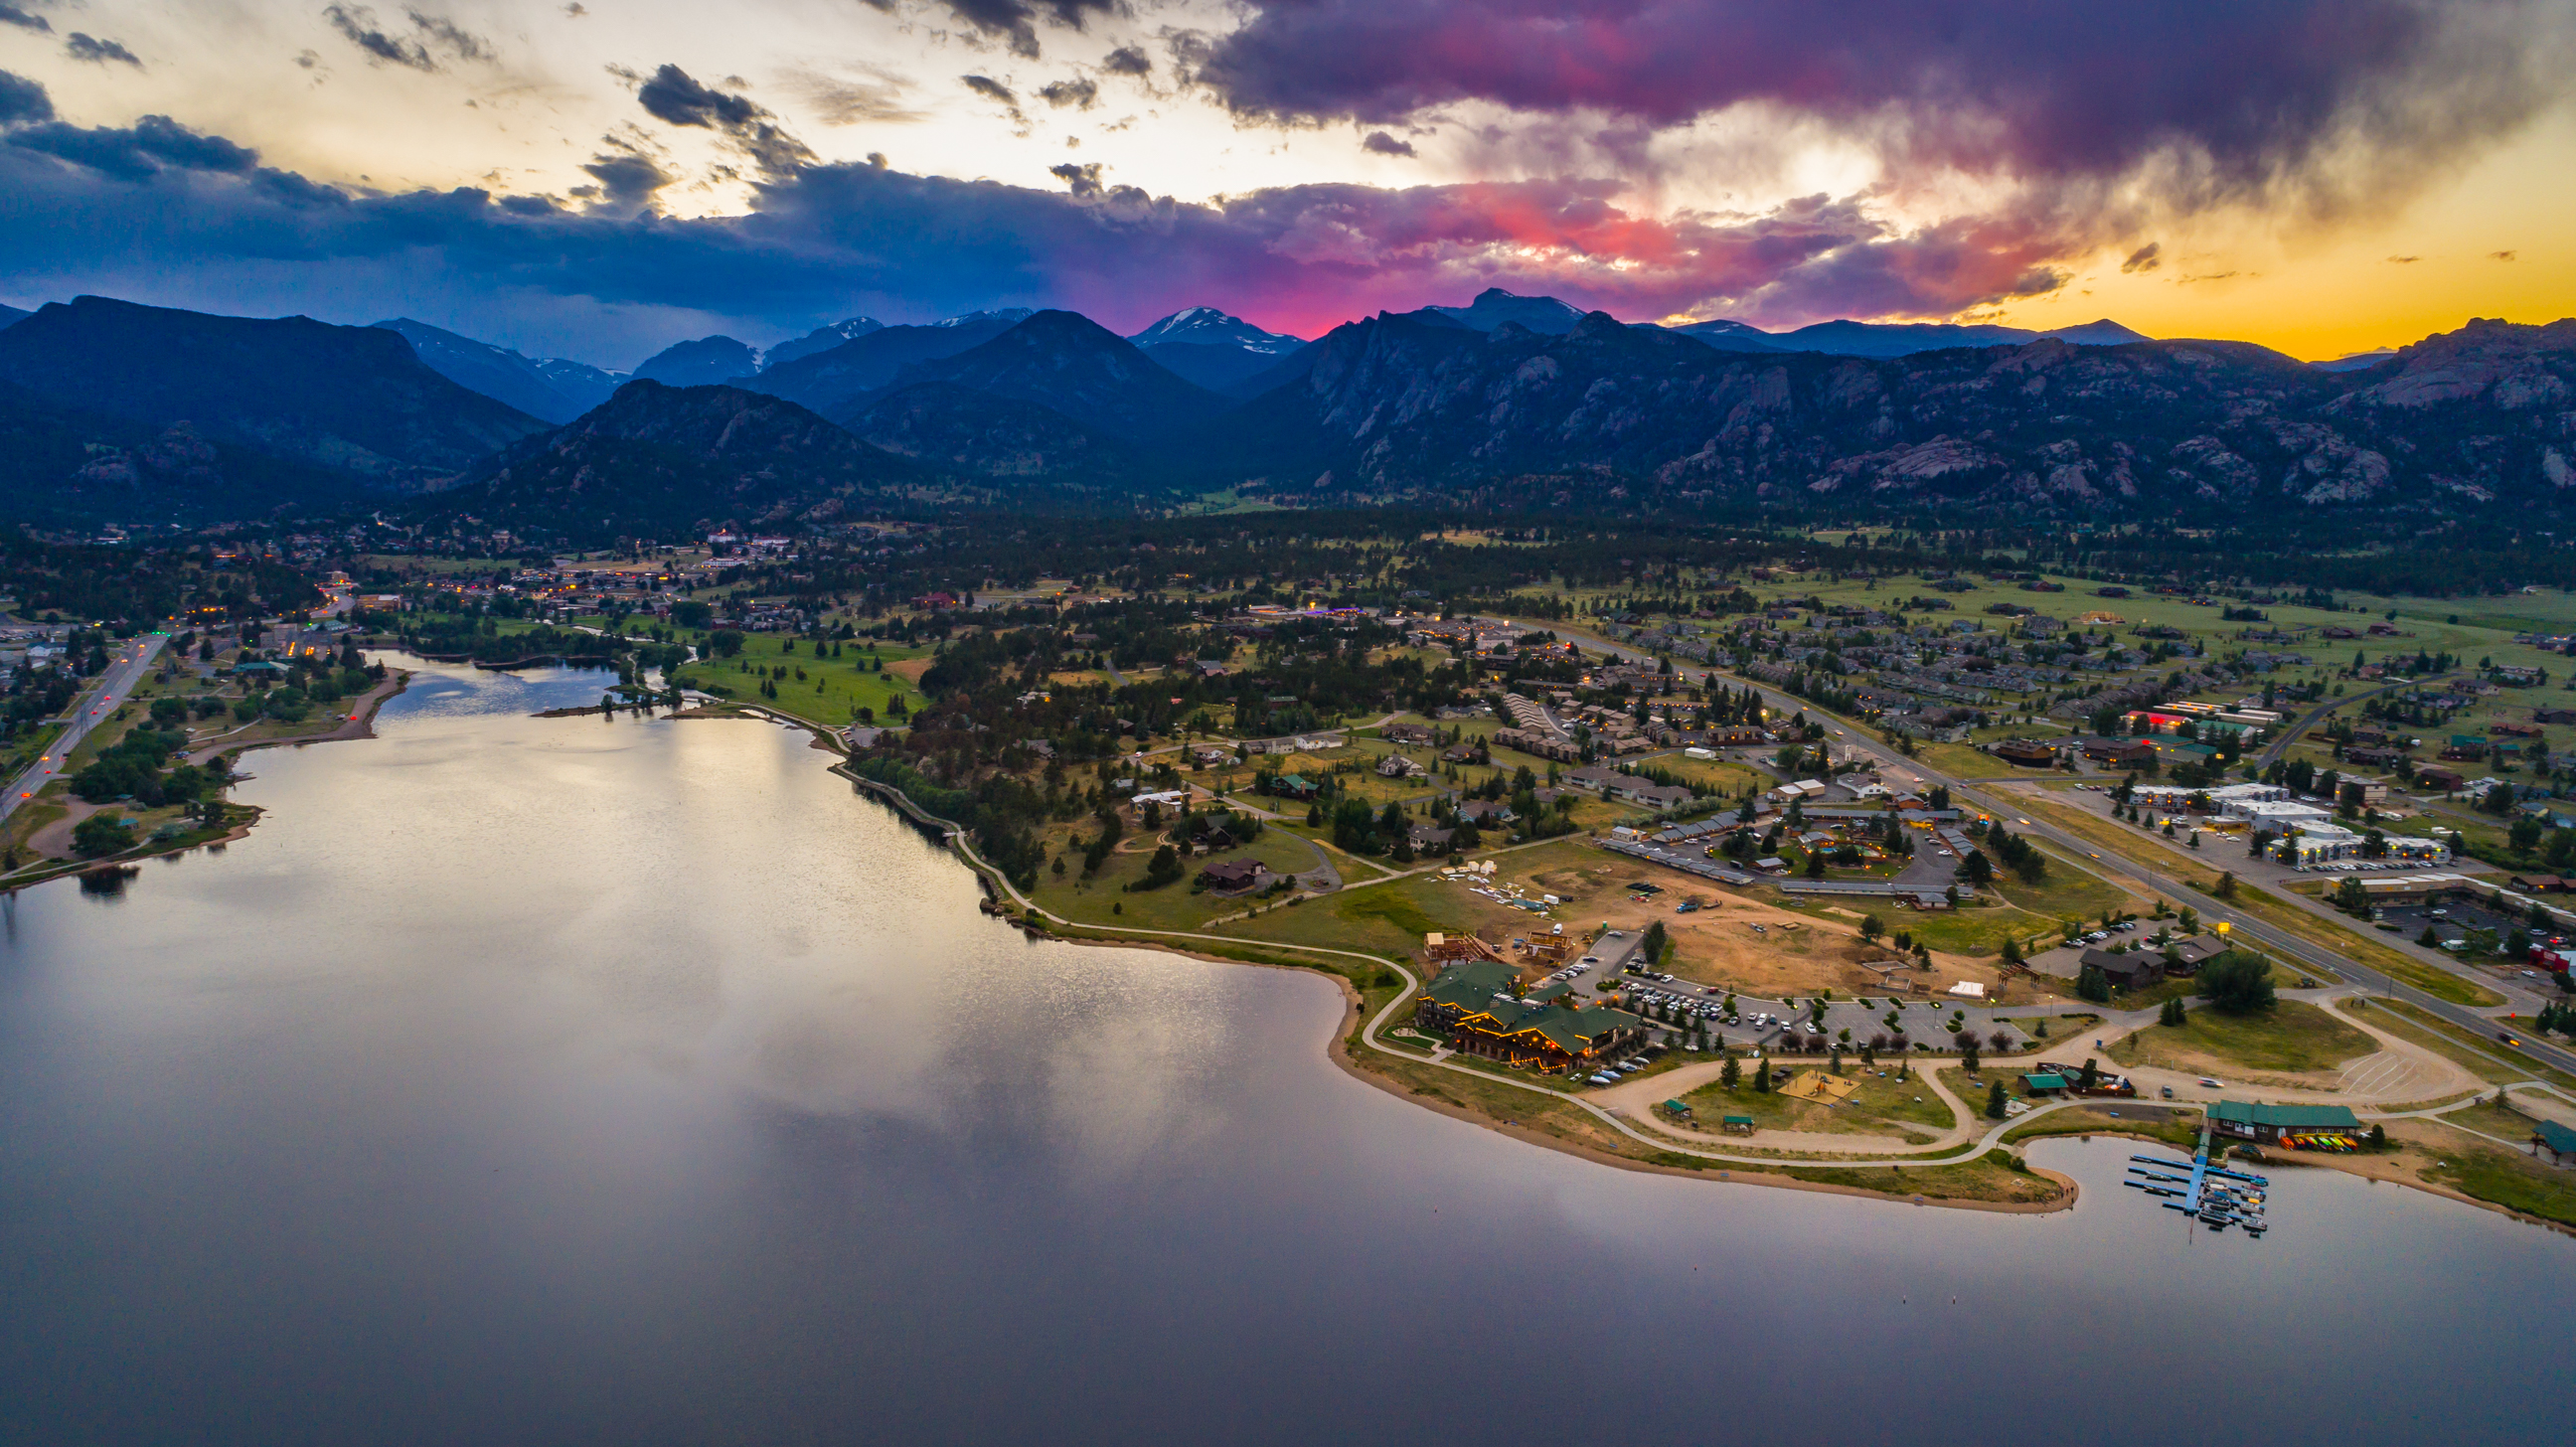 An aerial view of the Estes Park area